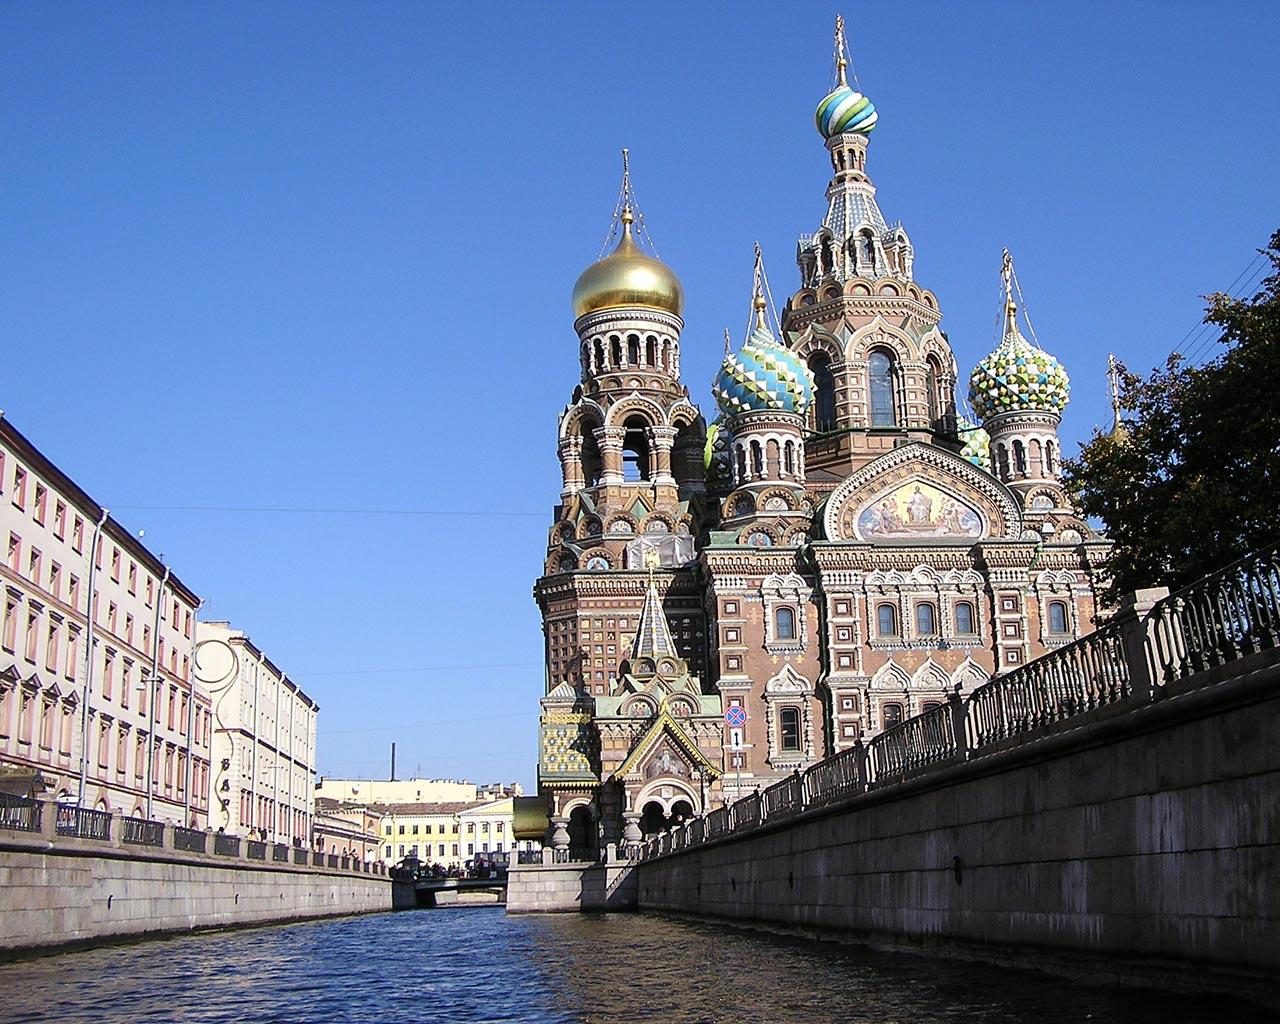 St Petersburg - Church of the Sviour on Spilled Blood Wallpaper #1 1280 x 1024 